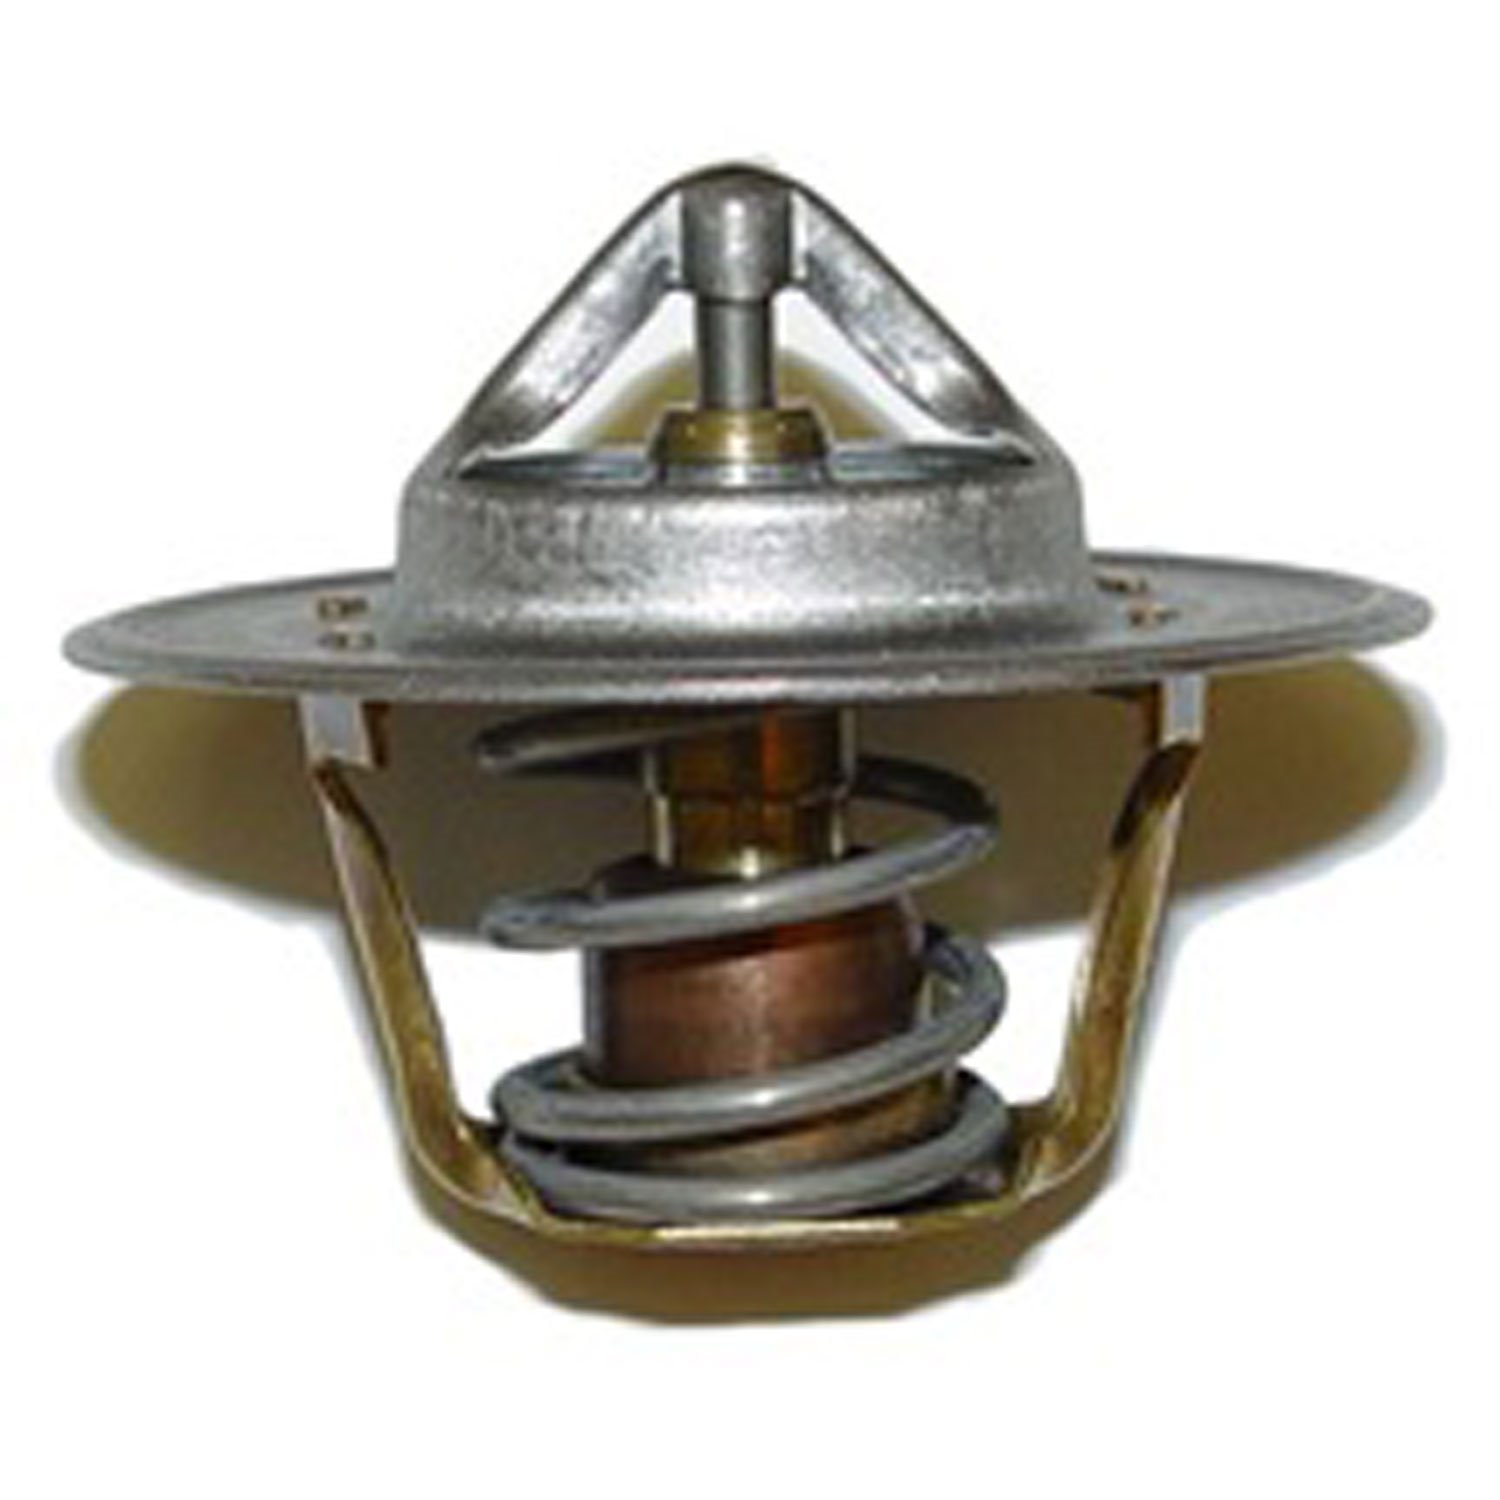 This 180-degree thermostat from Omix-ADA fits 72-06 Jeep CJ models and Wranglers.